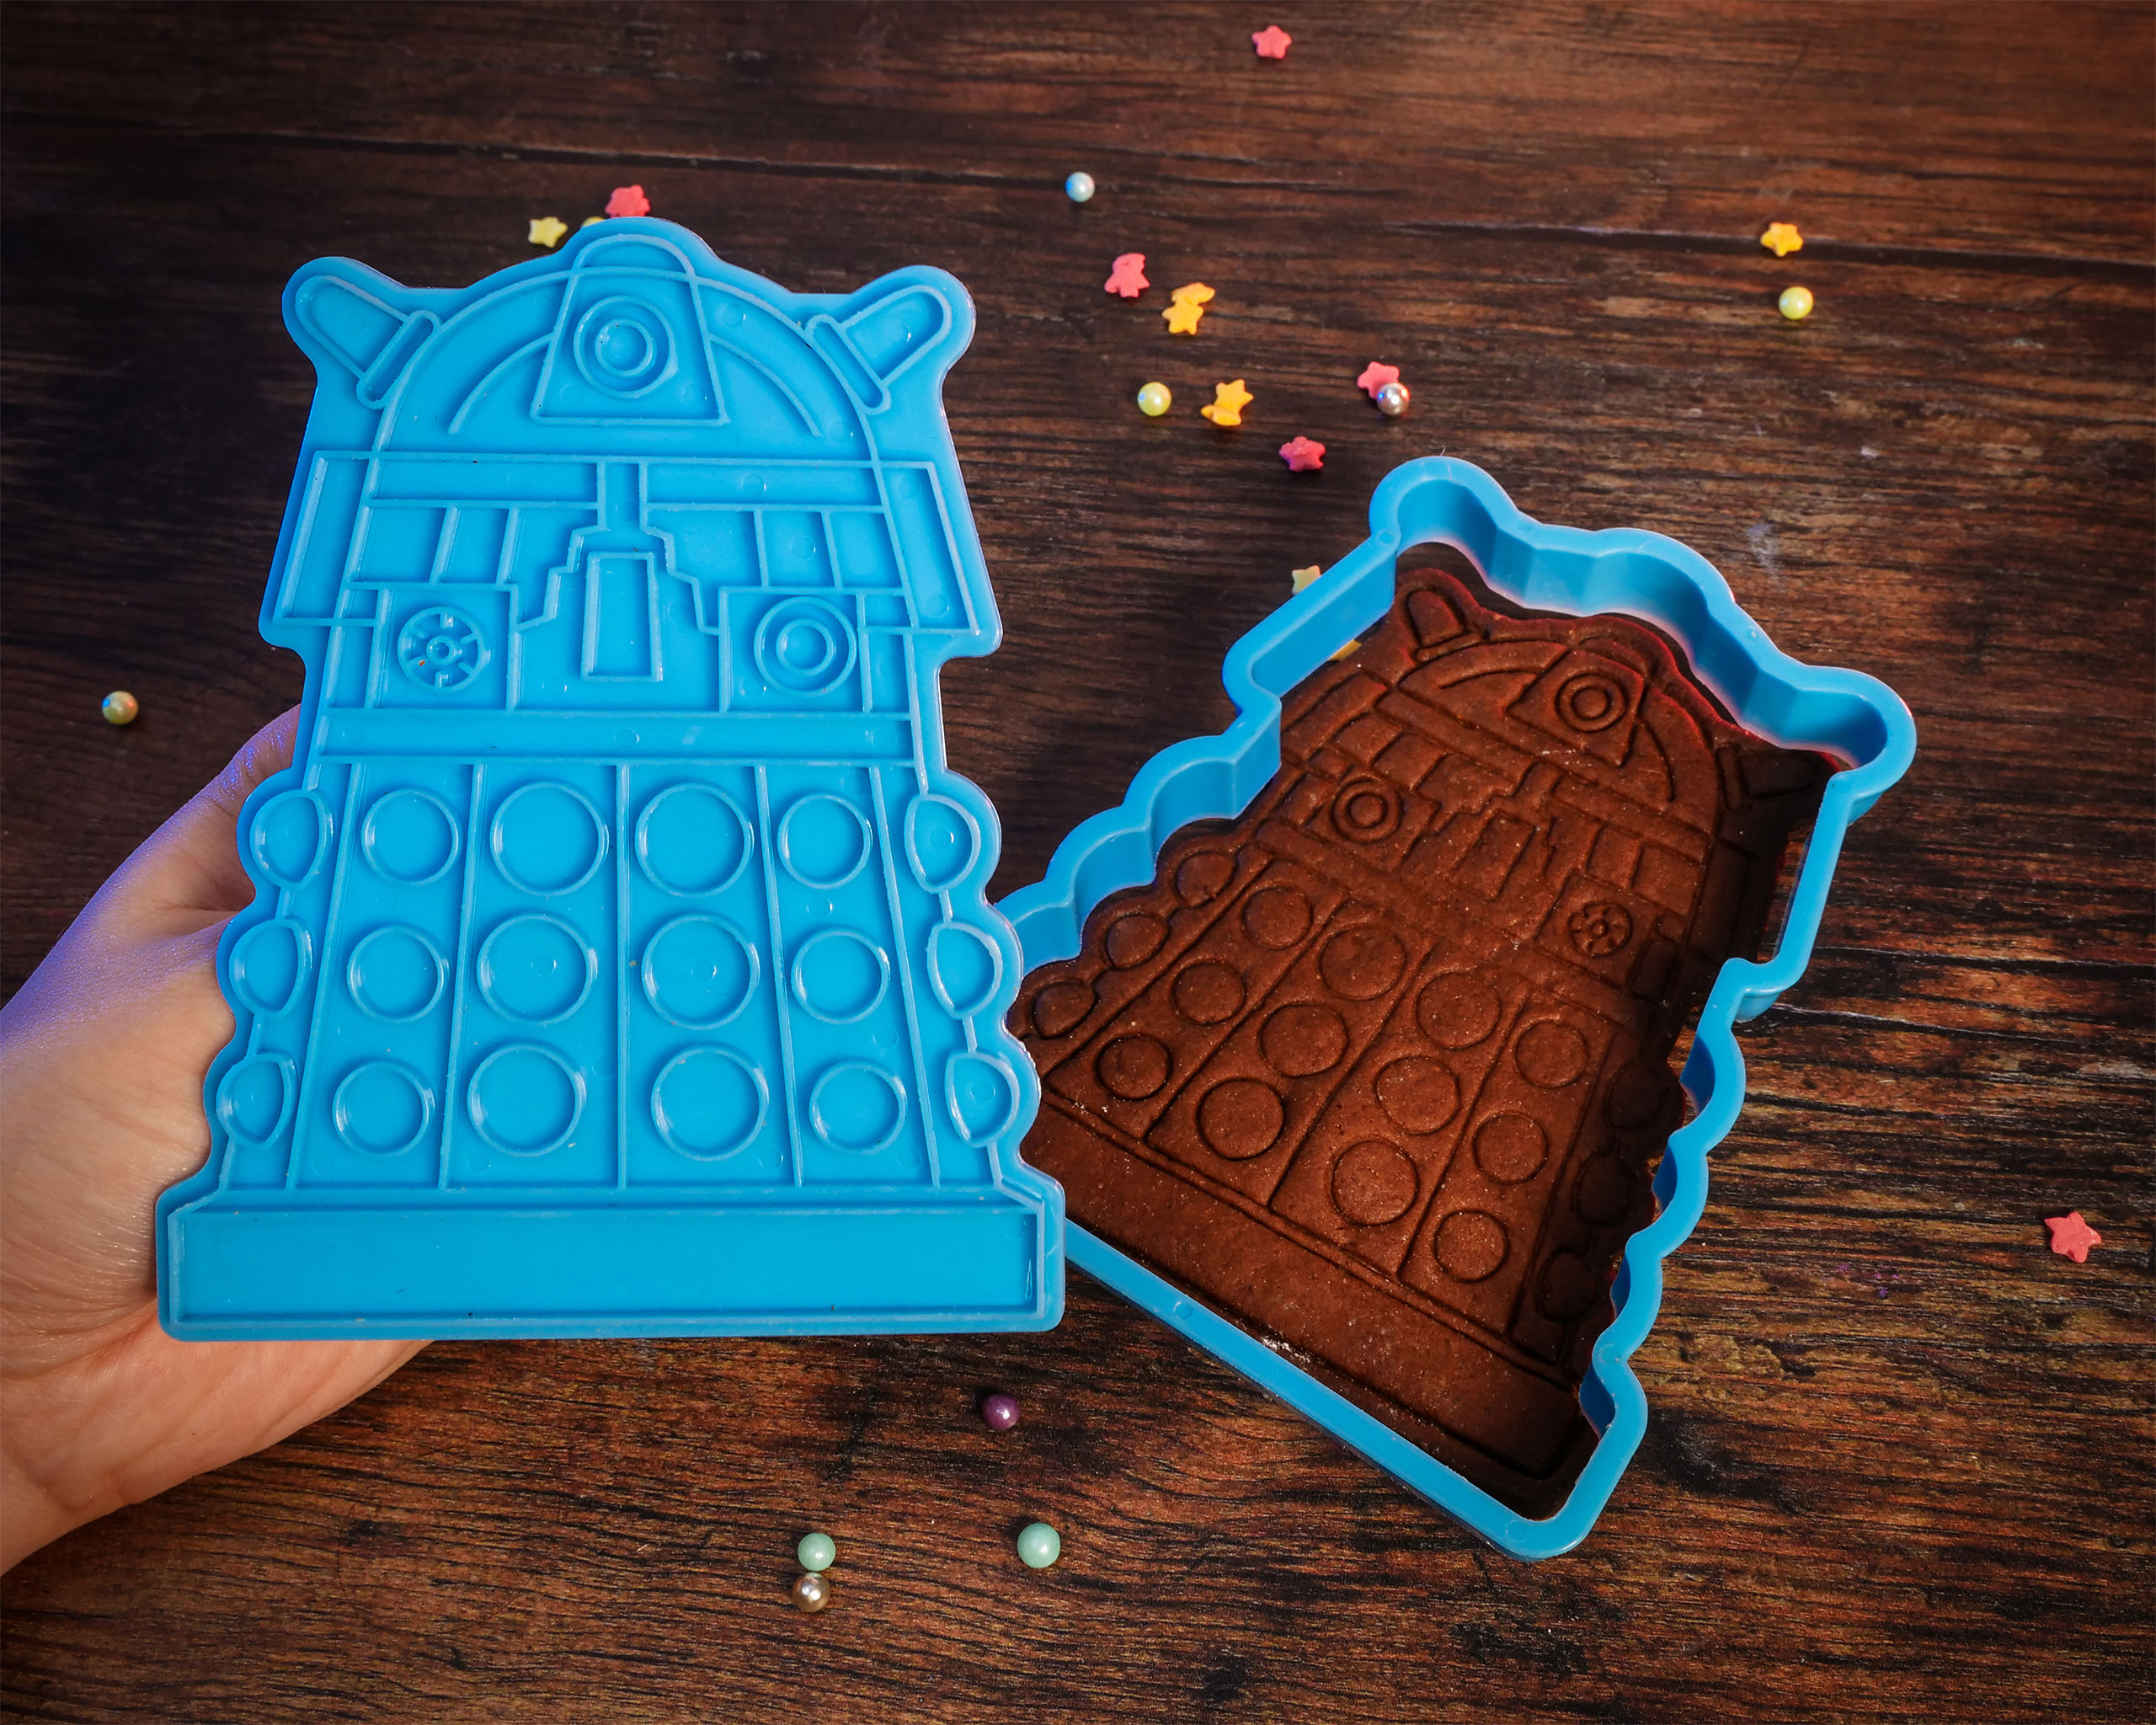 Doctor Who - Tardis and Dalek Cookie Jar with Cookie Cutters and Apron